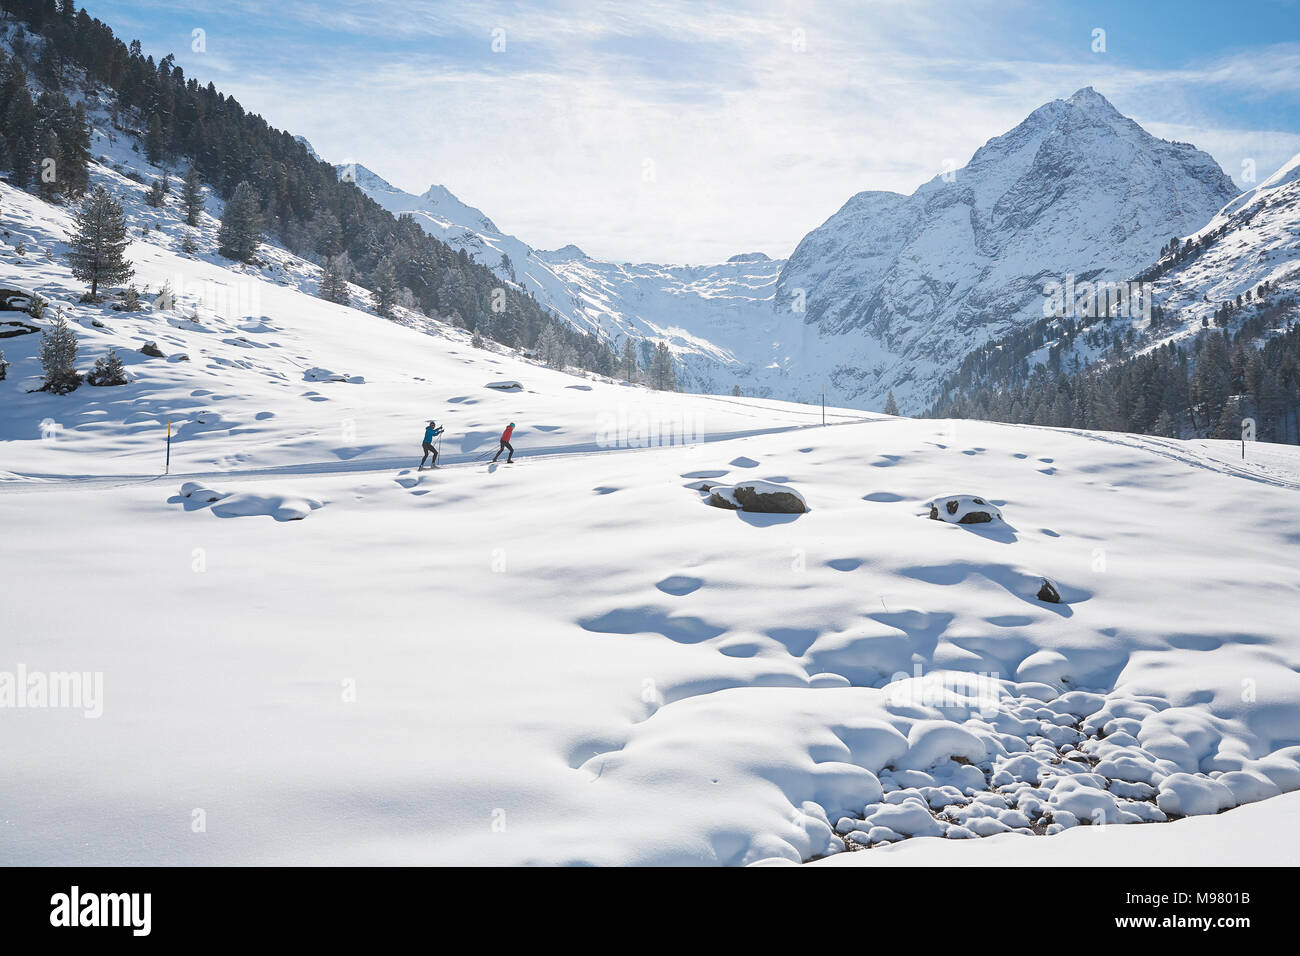 Austria, Tyrol, Luesens, Sellrain, two cross-country skiers in snow-covered landscape Stock Photo